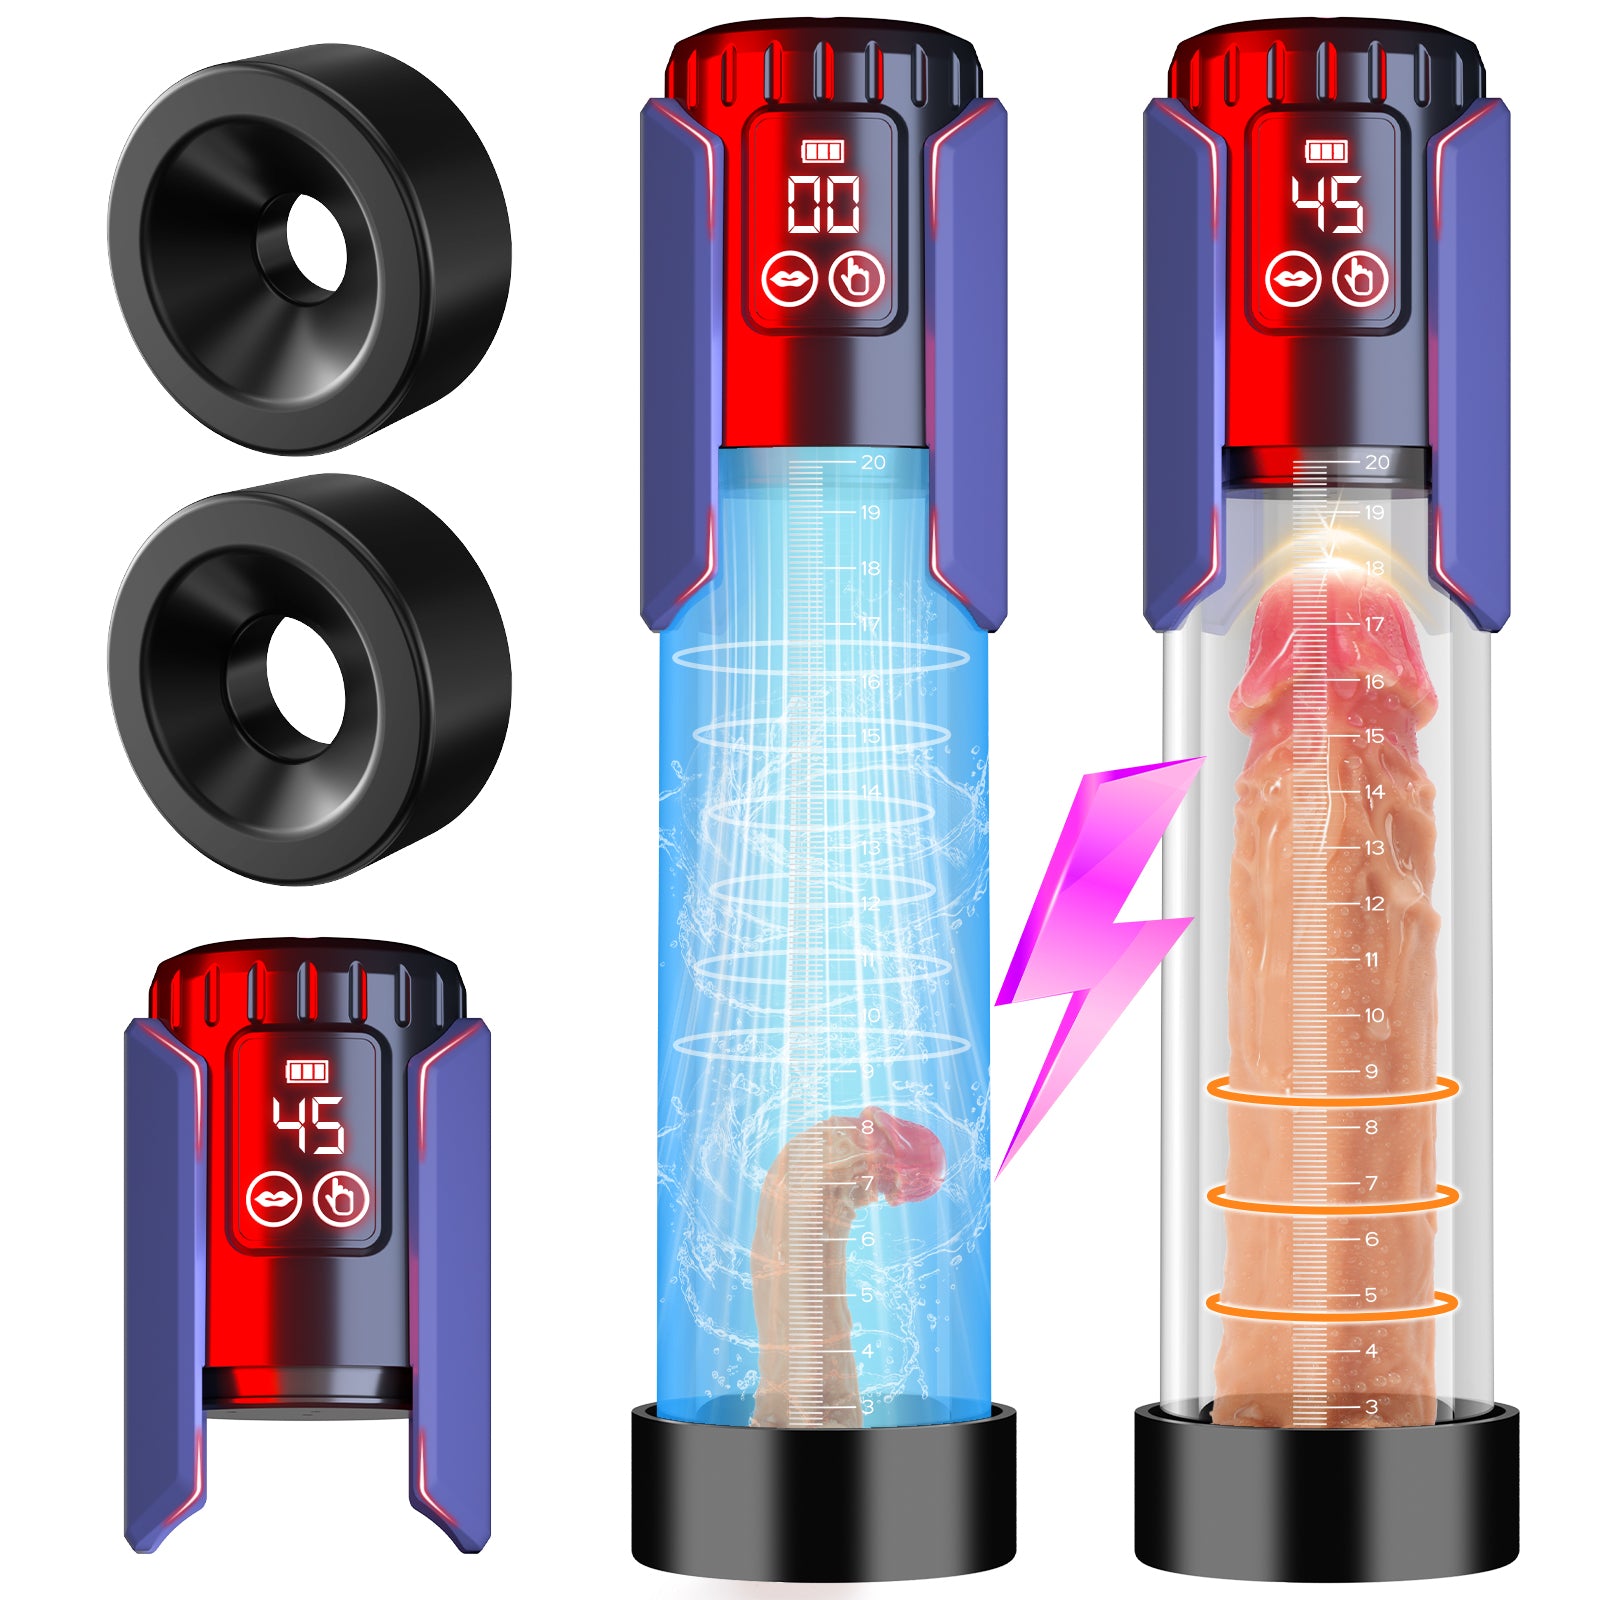 FIDECH Easy-to-See Display Electric Penis Pump Male Toy